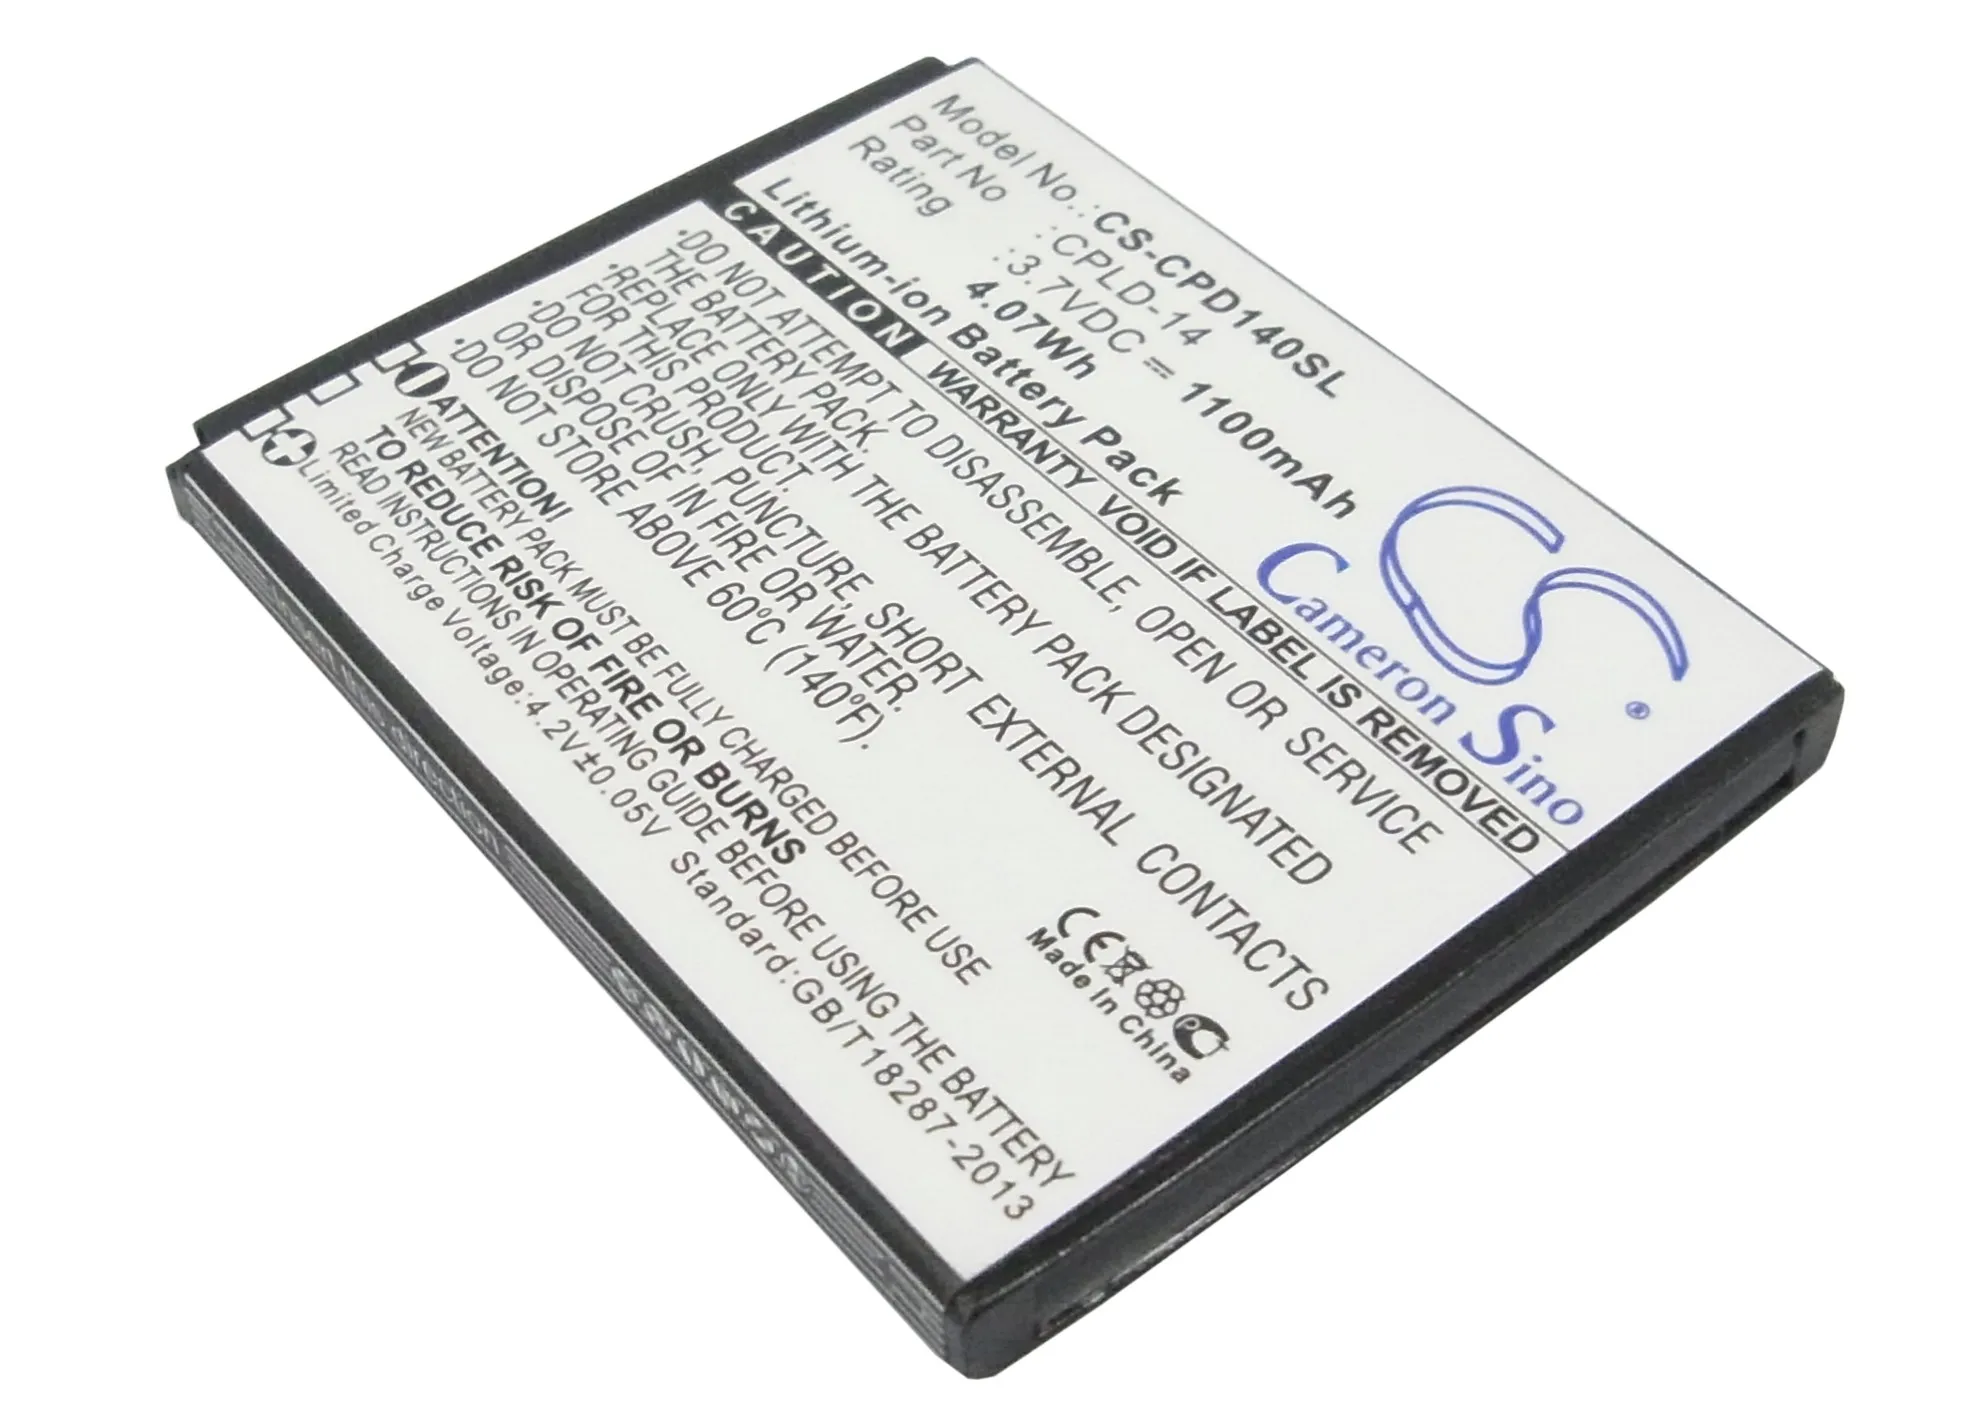 

CS 1100mAh / 4.07Wh battery for Coolpad 8150D, 8150S CPLD-14